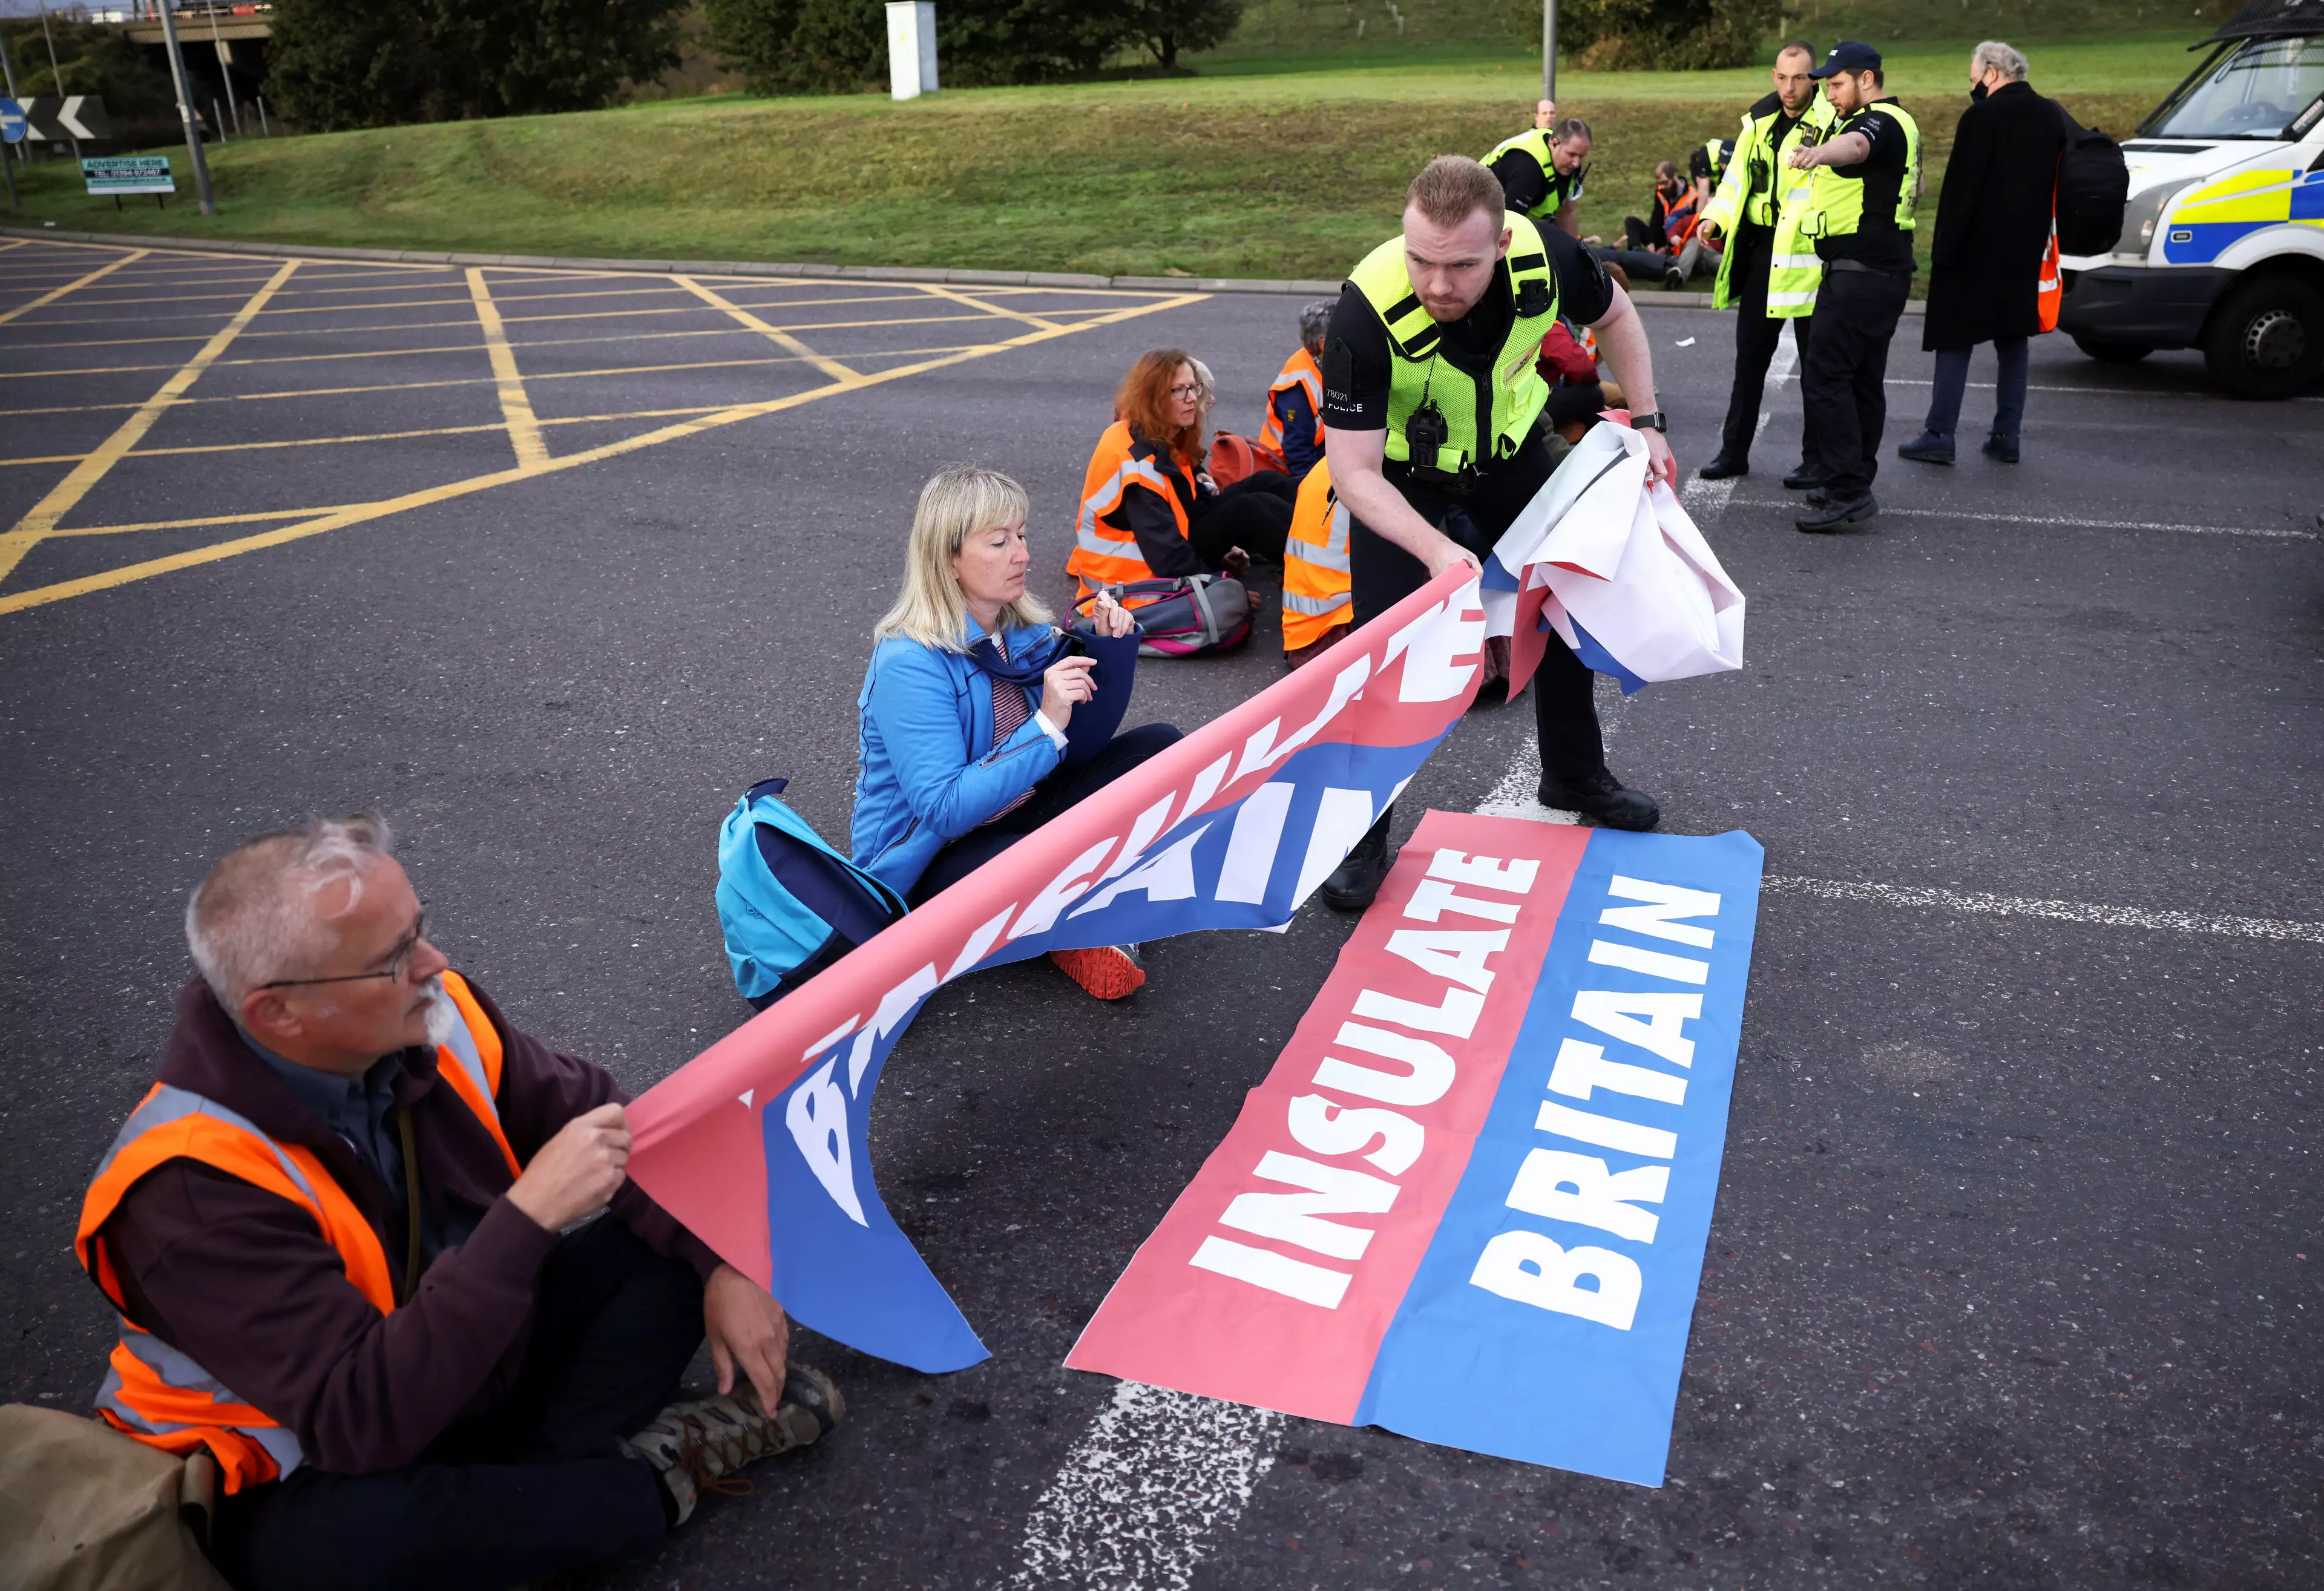 Insulate Britain activists have shut down motorways such as the M25 in protest.